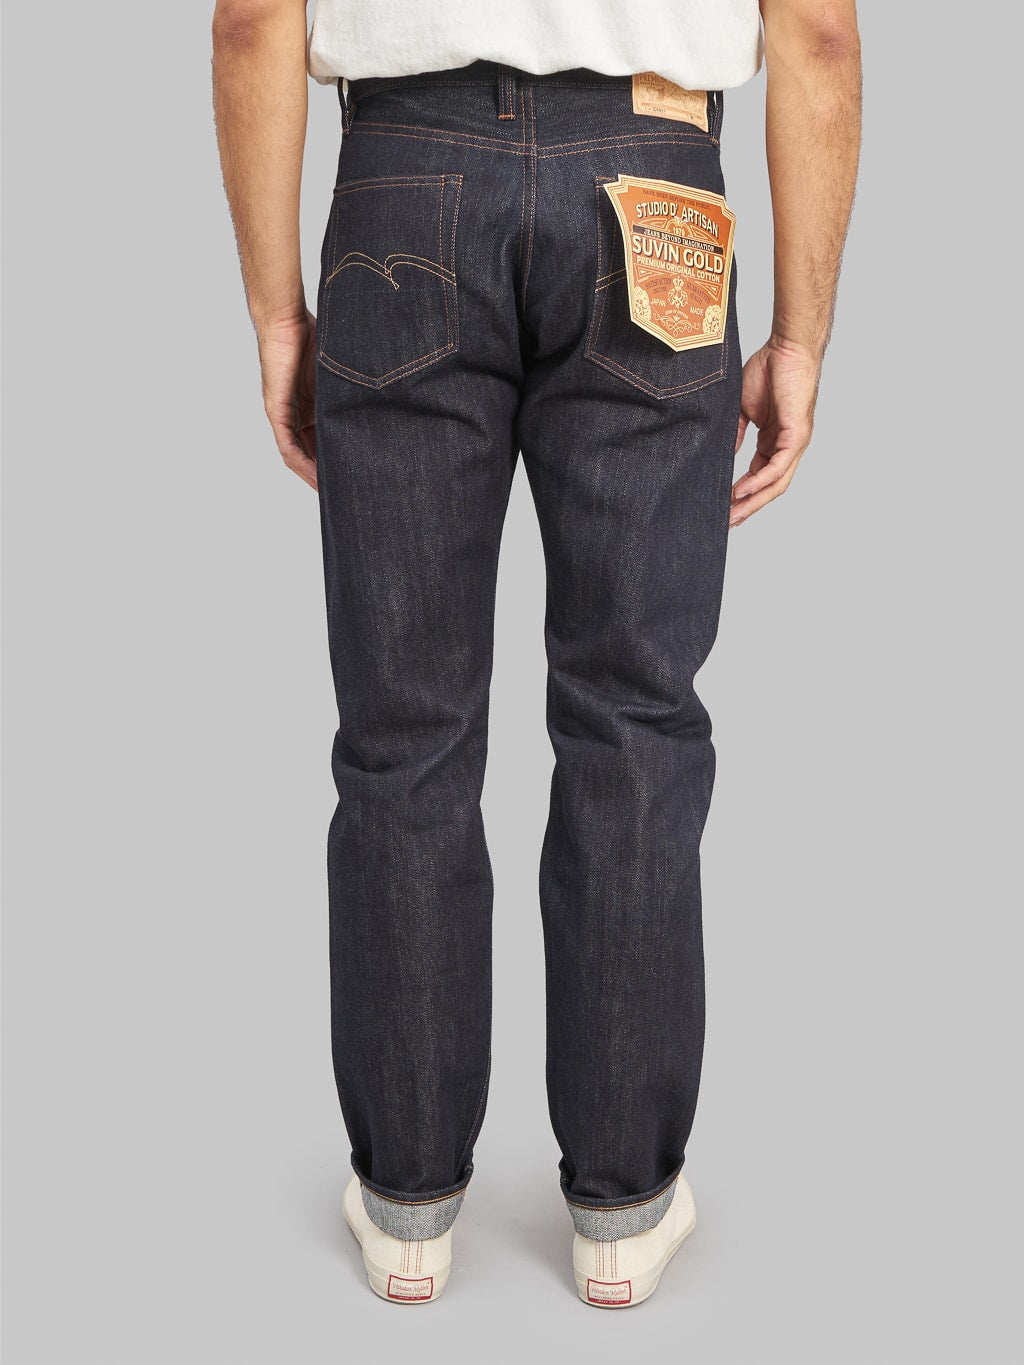 Studio dartisan suvin gold relaxed tapered jeans back rise